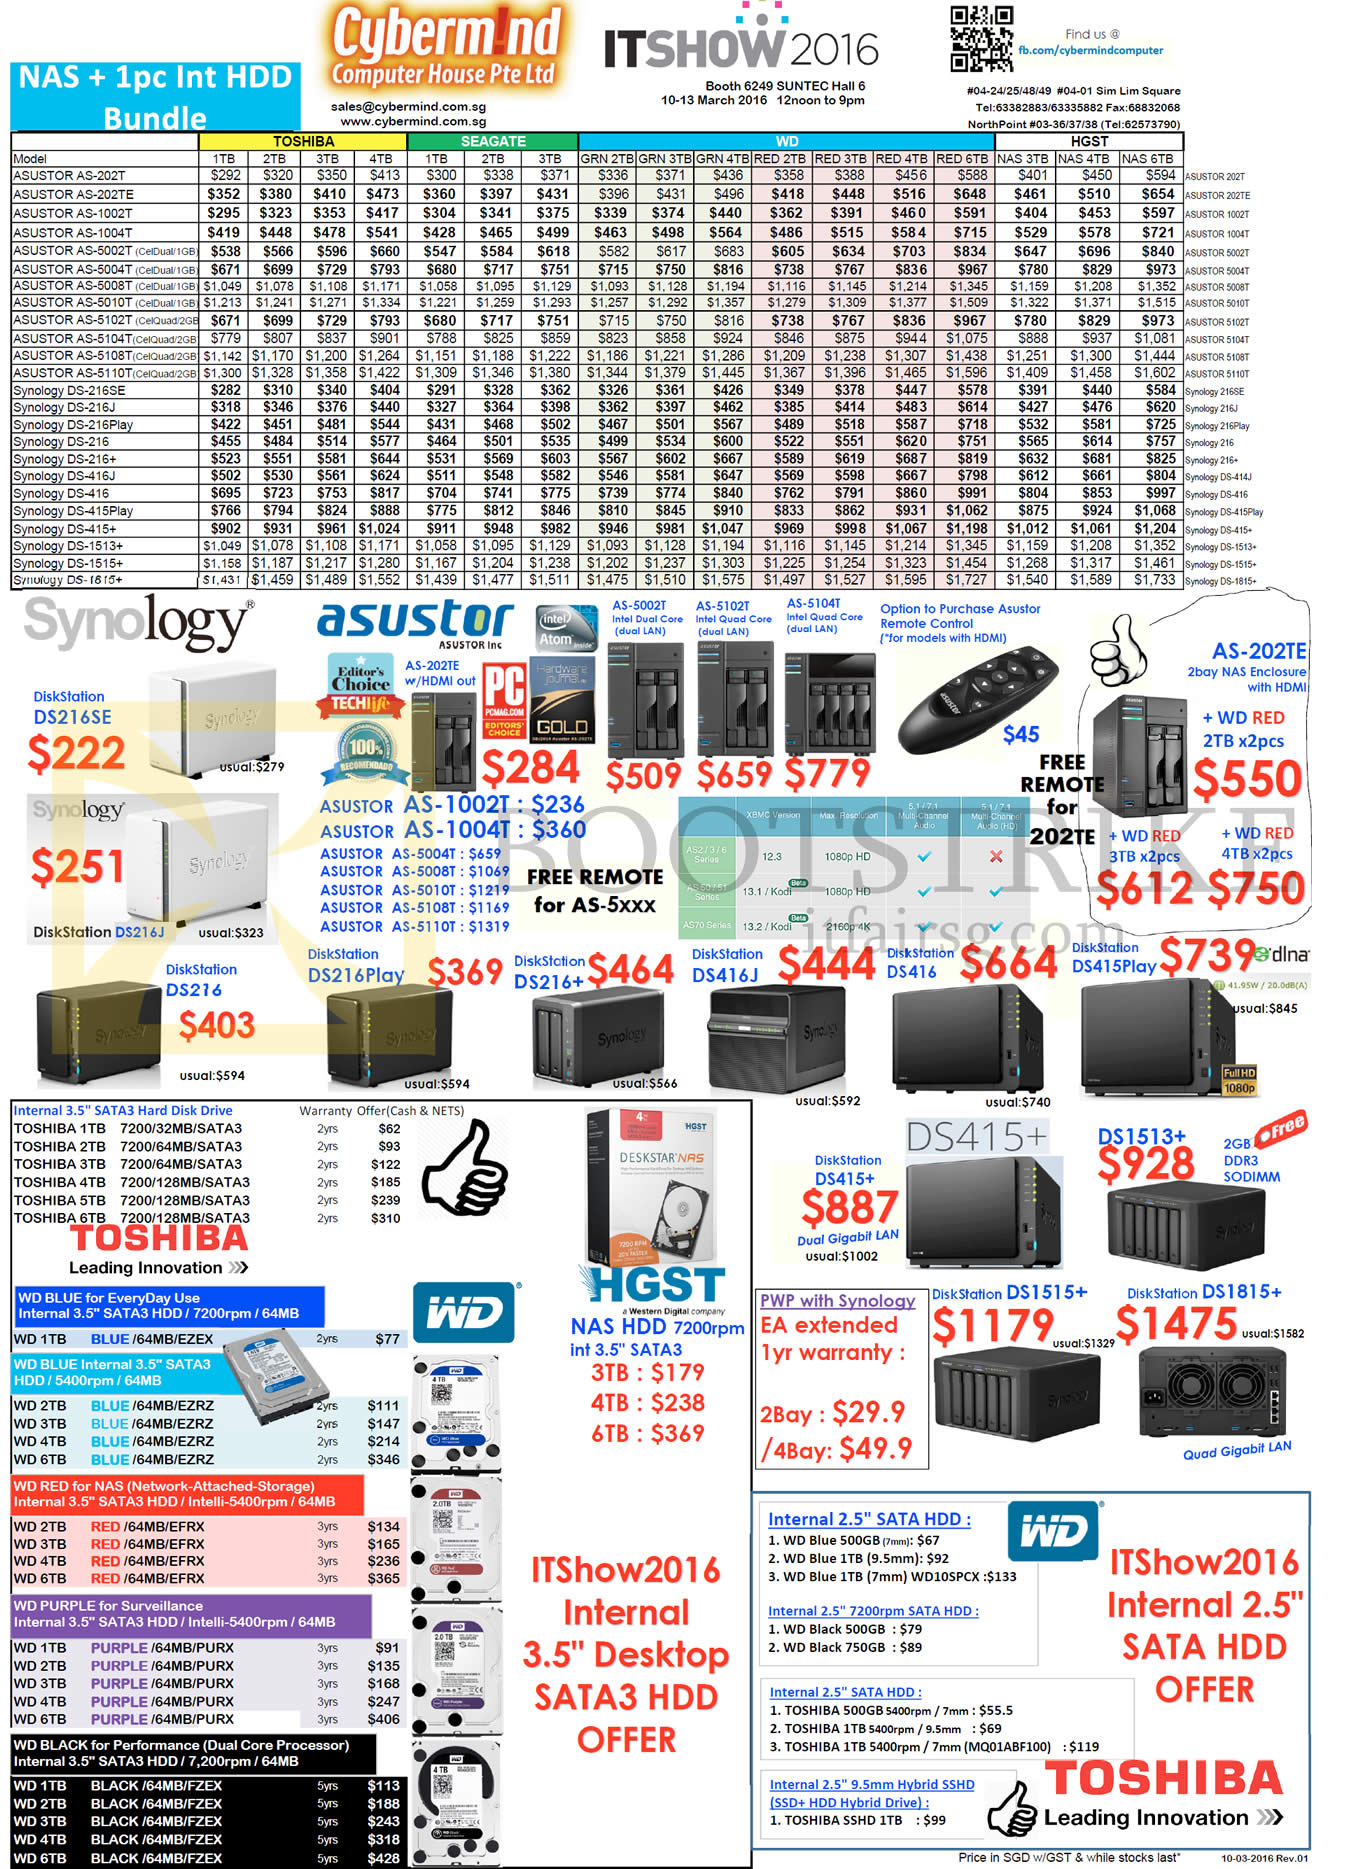 IT SHOW 2016 price list image brochure of Cybermind NAS, HDD Bundle, HDDs, Synology, Asustor, Toshiba, Western Digital, HGST